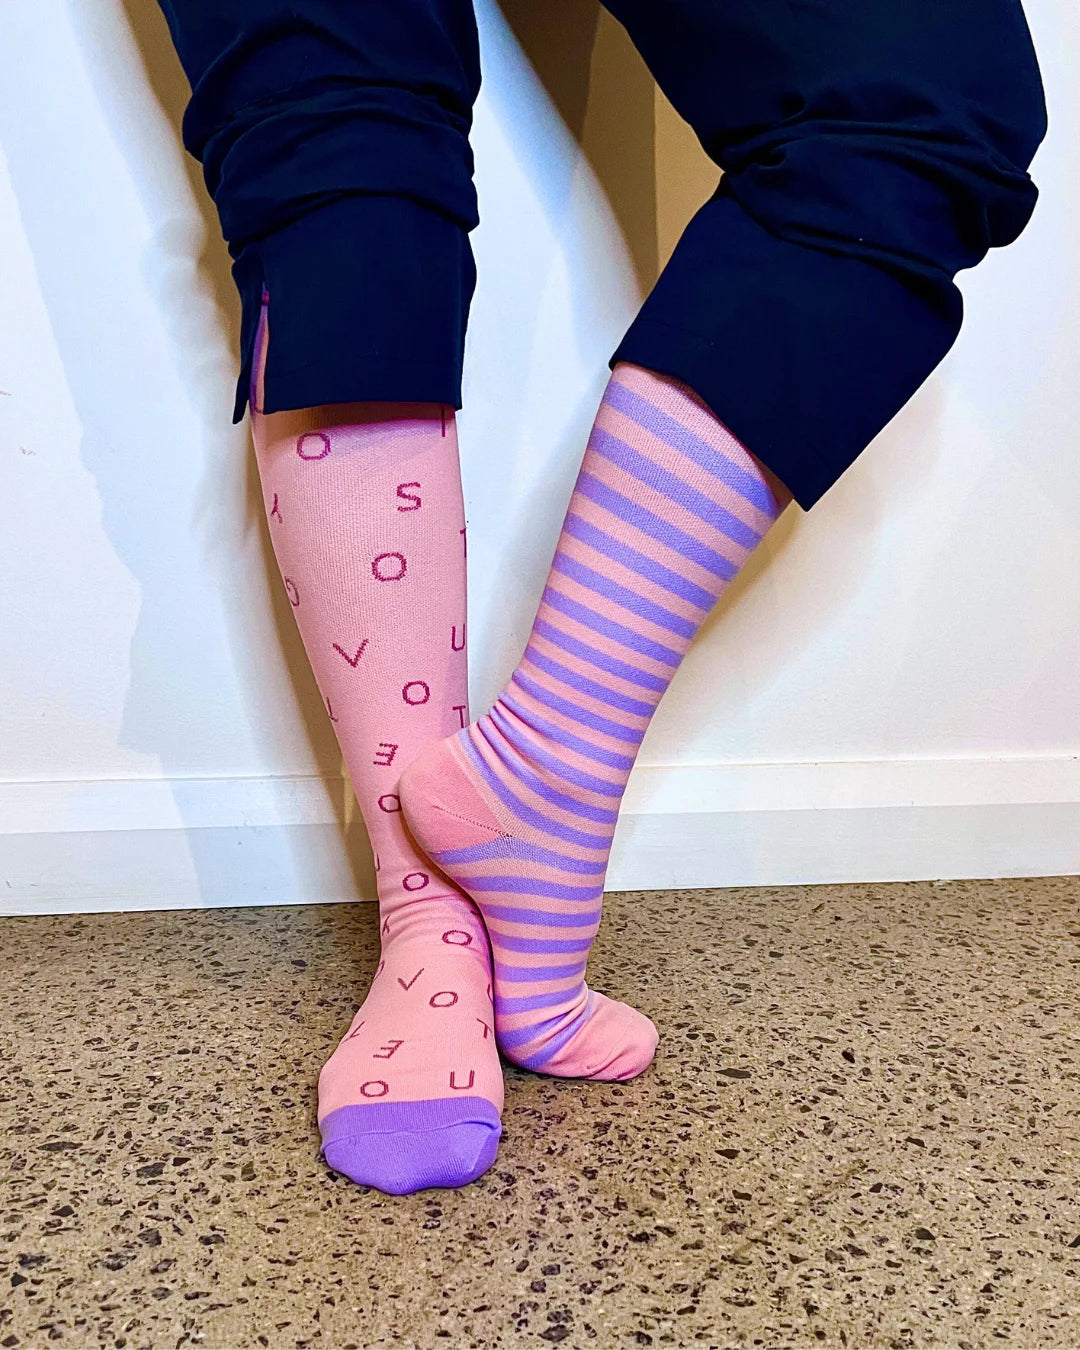 Overtime Fairy Floss "You've Got This" Compression Socks